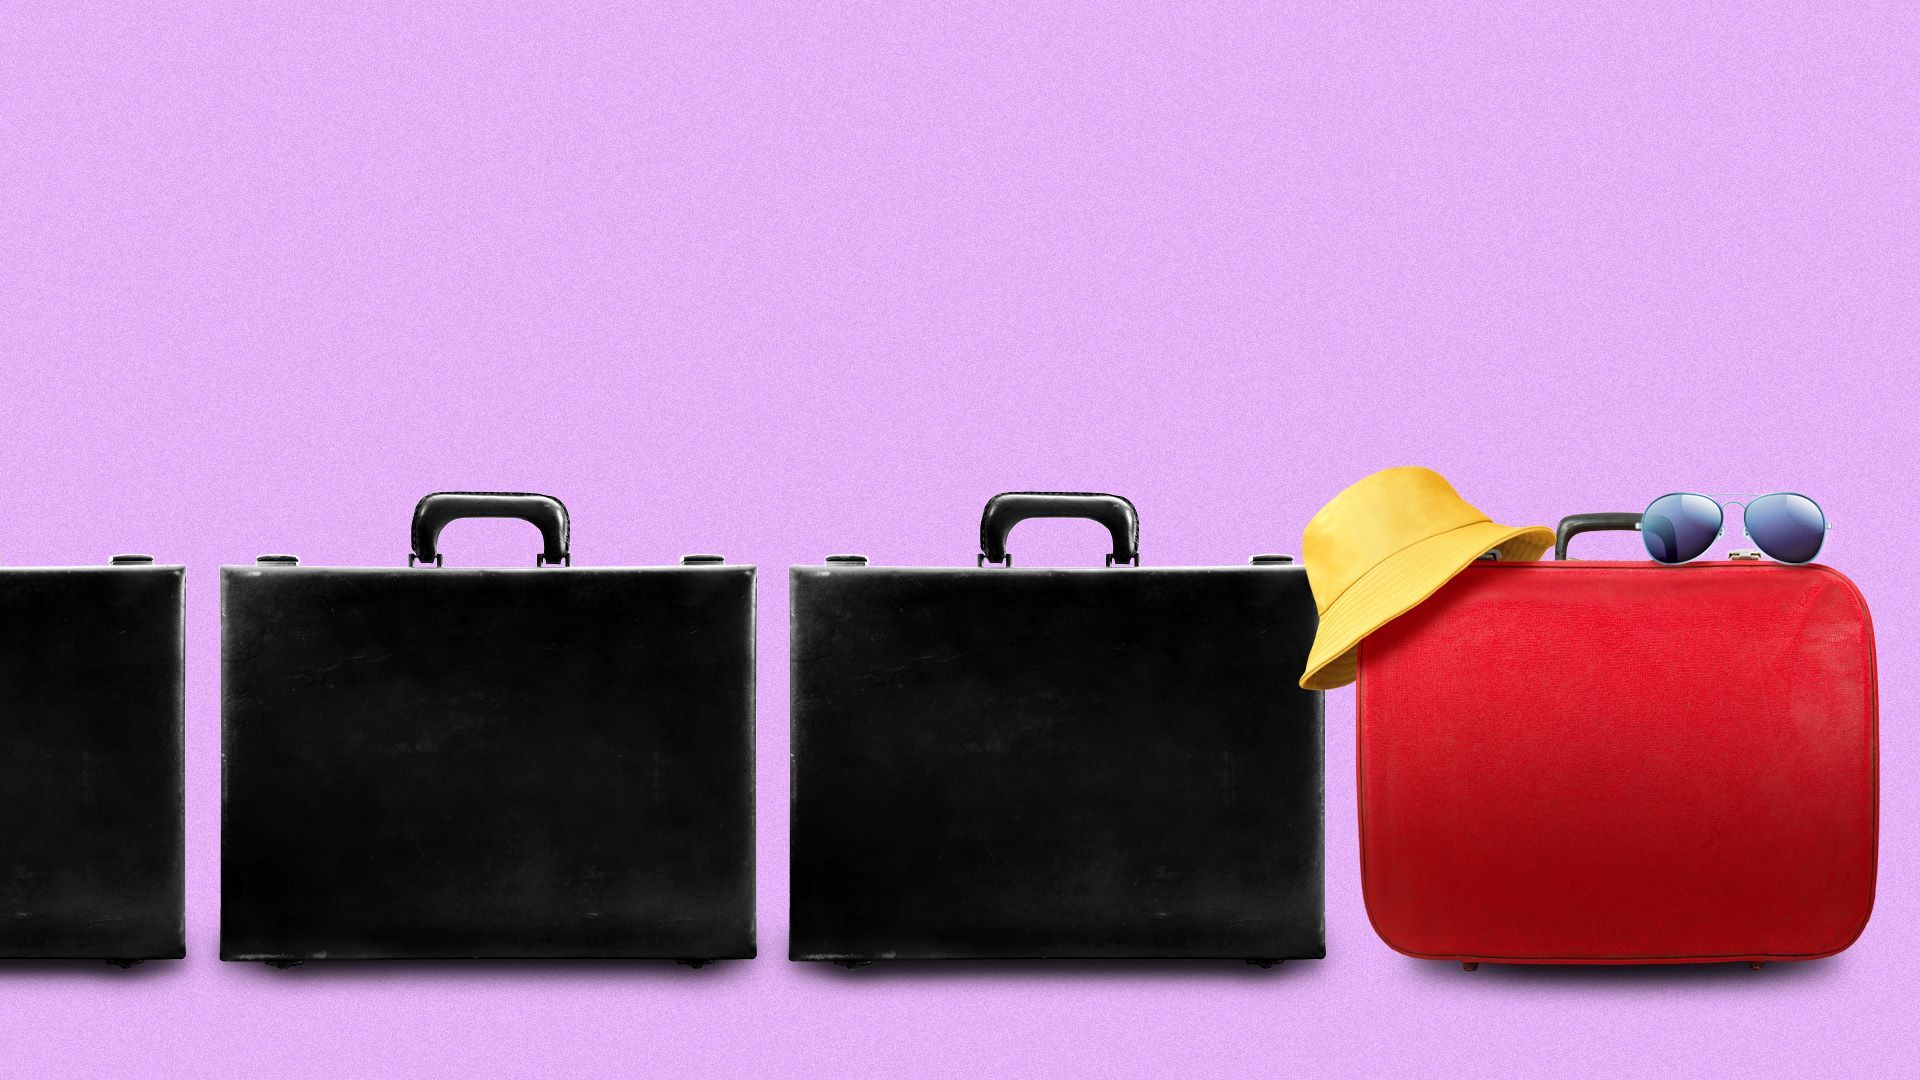 Illustration of a line of briefcases followed by a suitcase with a pair of sunglasses and a hat on it